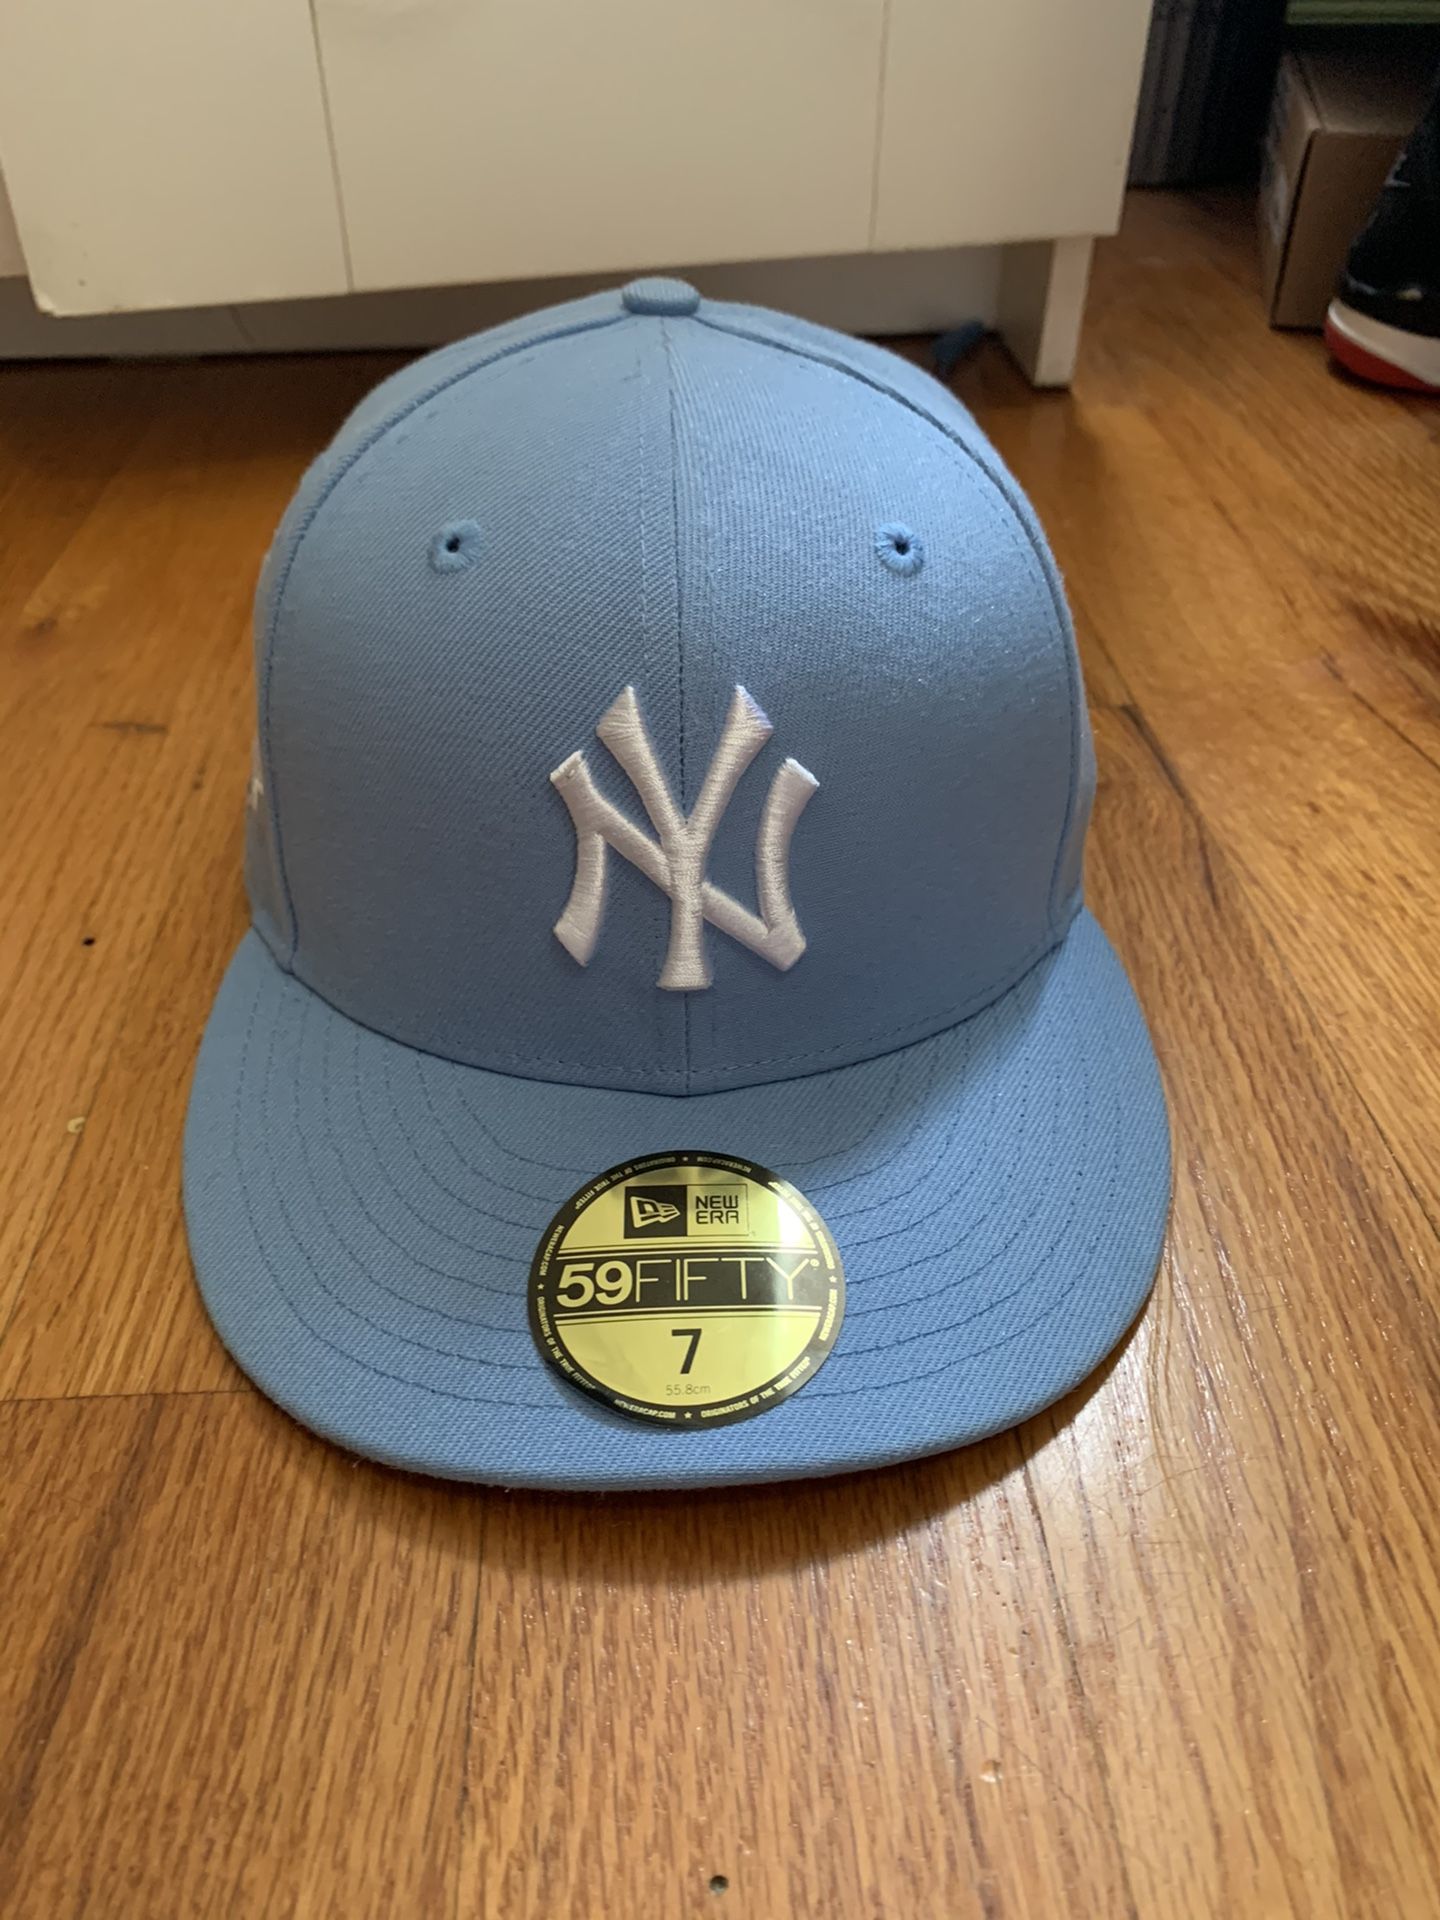 Yankee Fitted Light Blue Pink Uv for Sale in Staten Island, NY - OfferUp